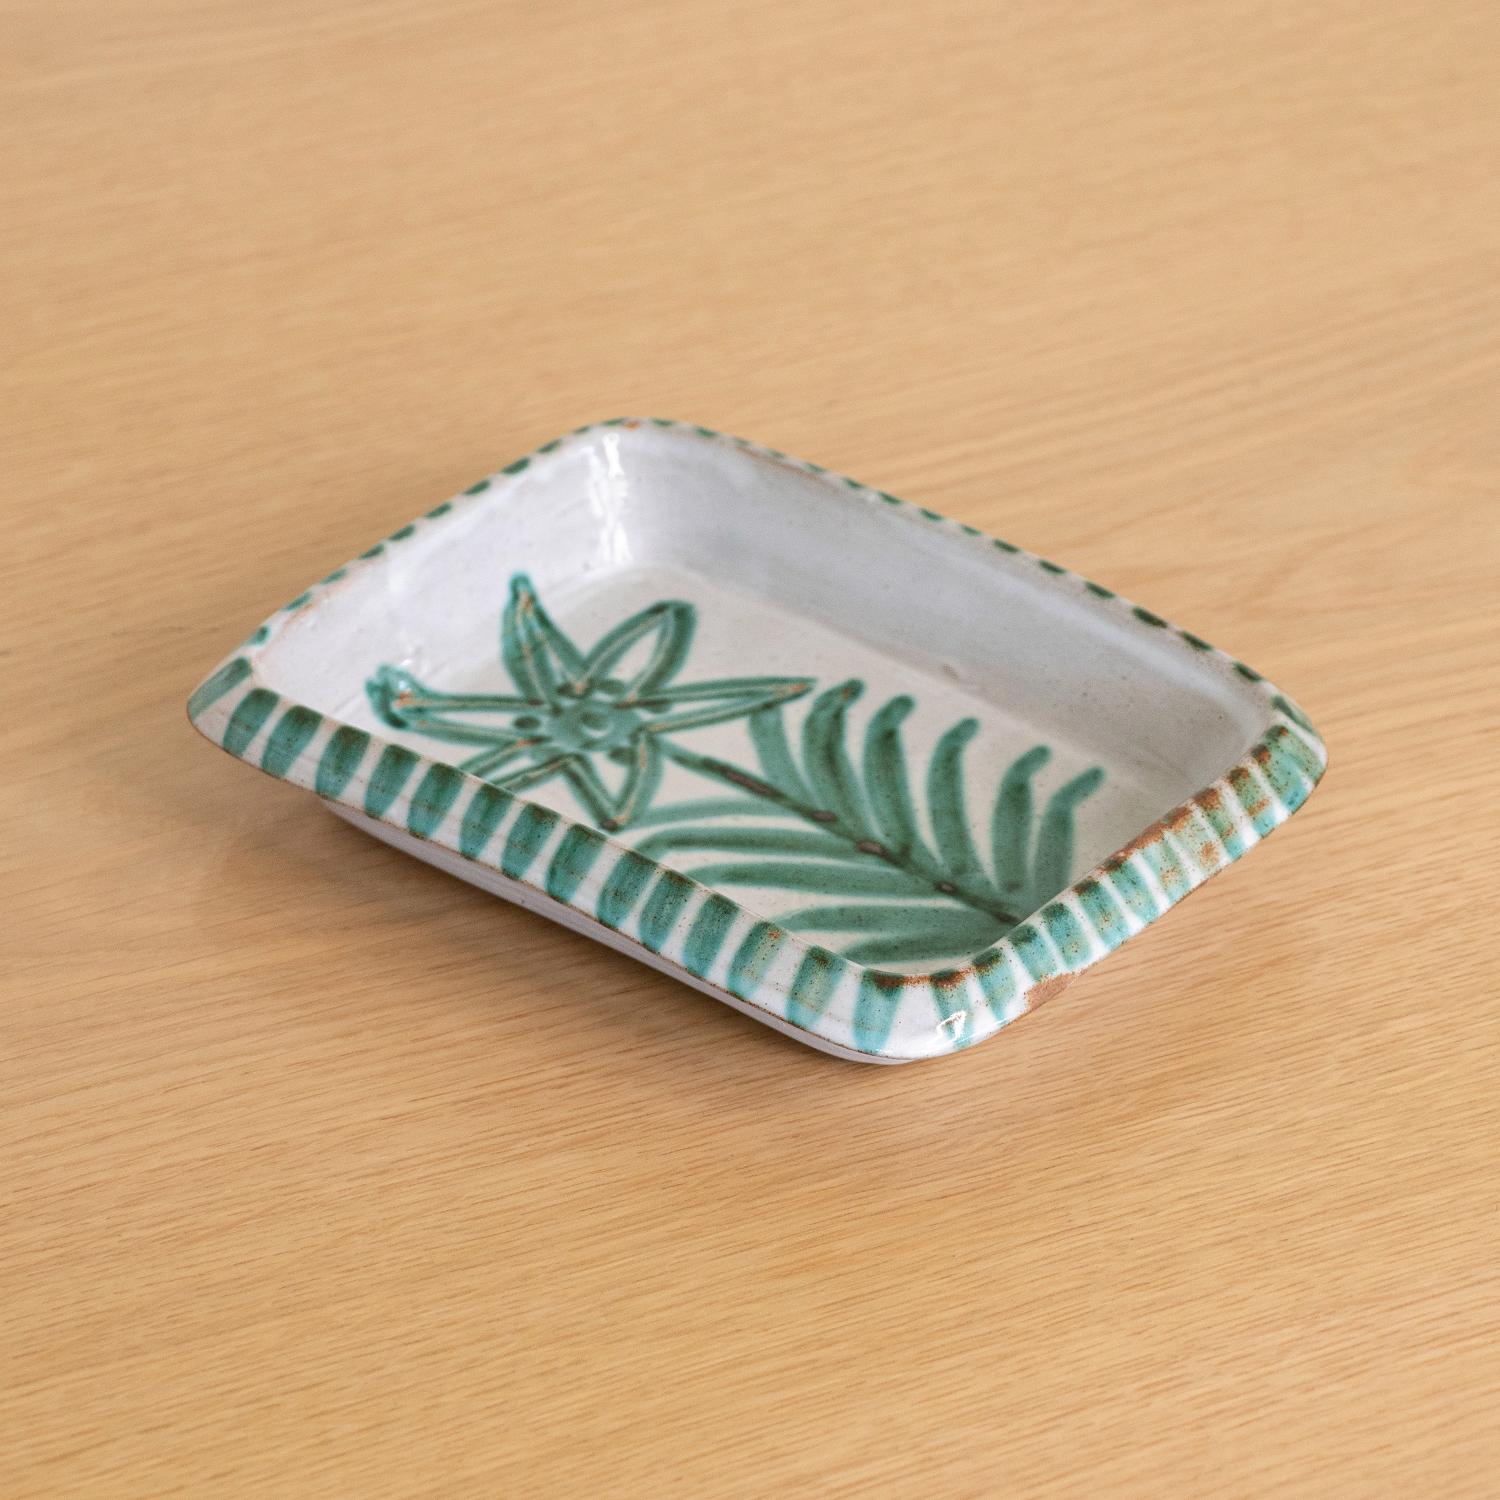 Beautiful painted ceramic dish by Robert Picault, France, 1950s. Rectangular dish with painted flower and green striped edge. Perfect as a catch-all or jewelry tray. Signed.